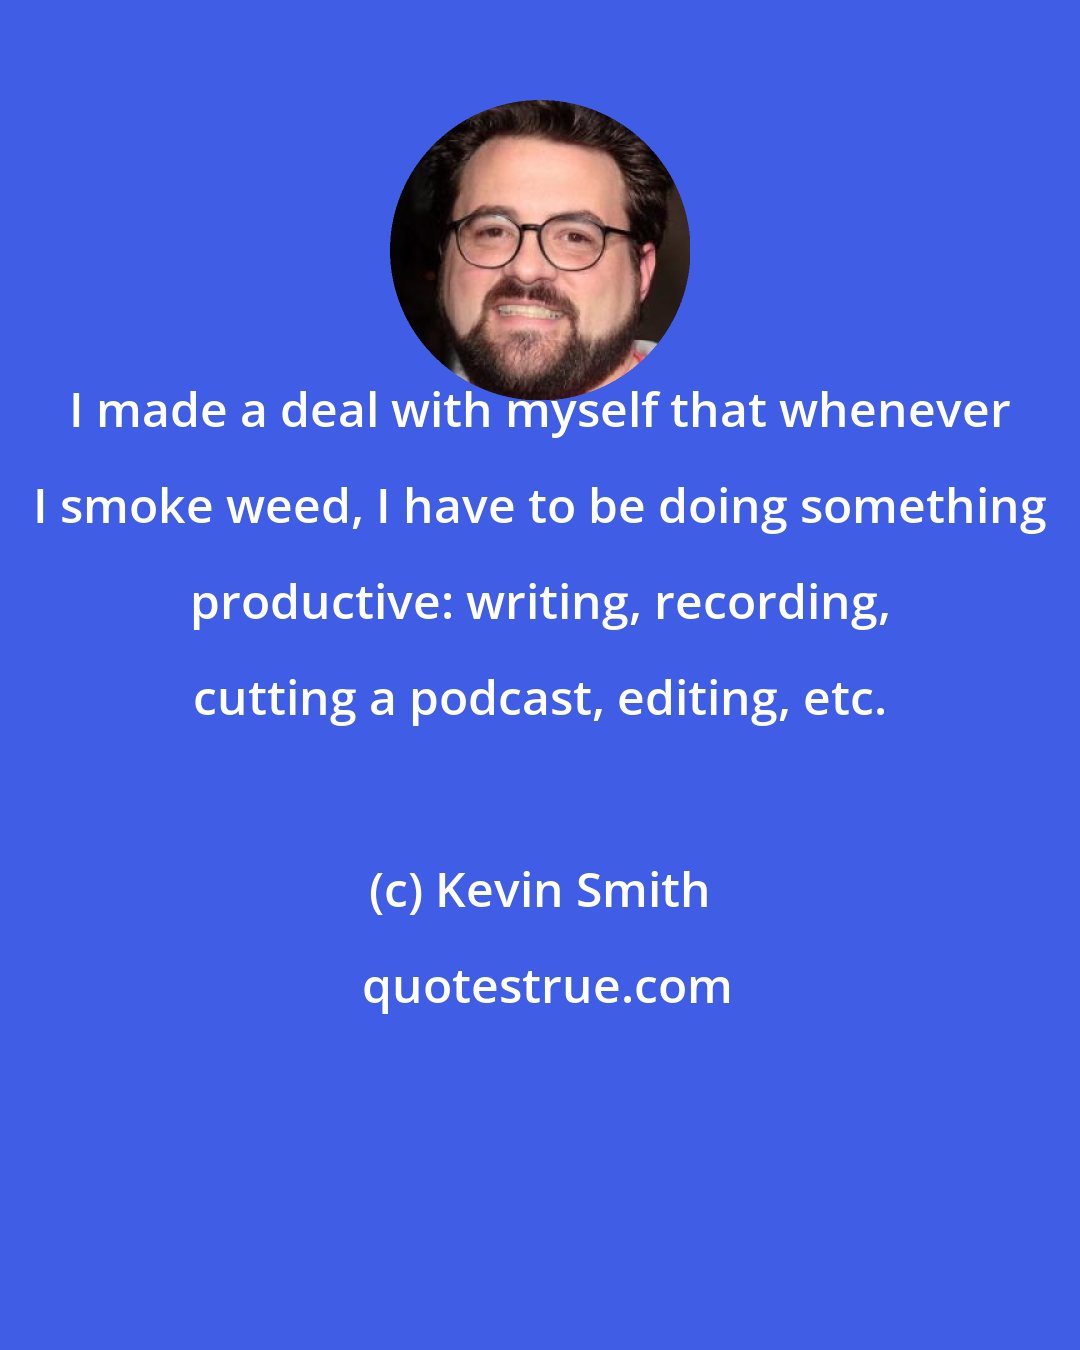 Kevin Smith: I made a deal with myself that whenever I smoke weed, I have to be doing something productive: writing, recording, cutting a podcast, editing, etc.